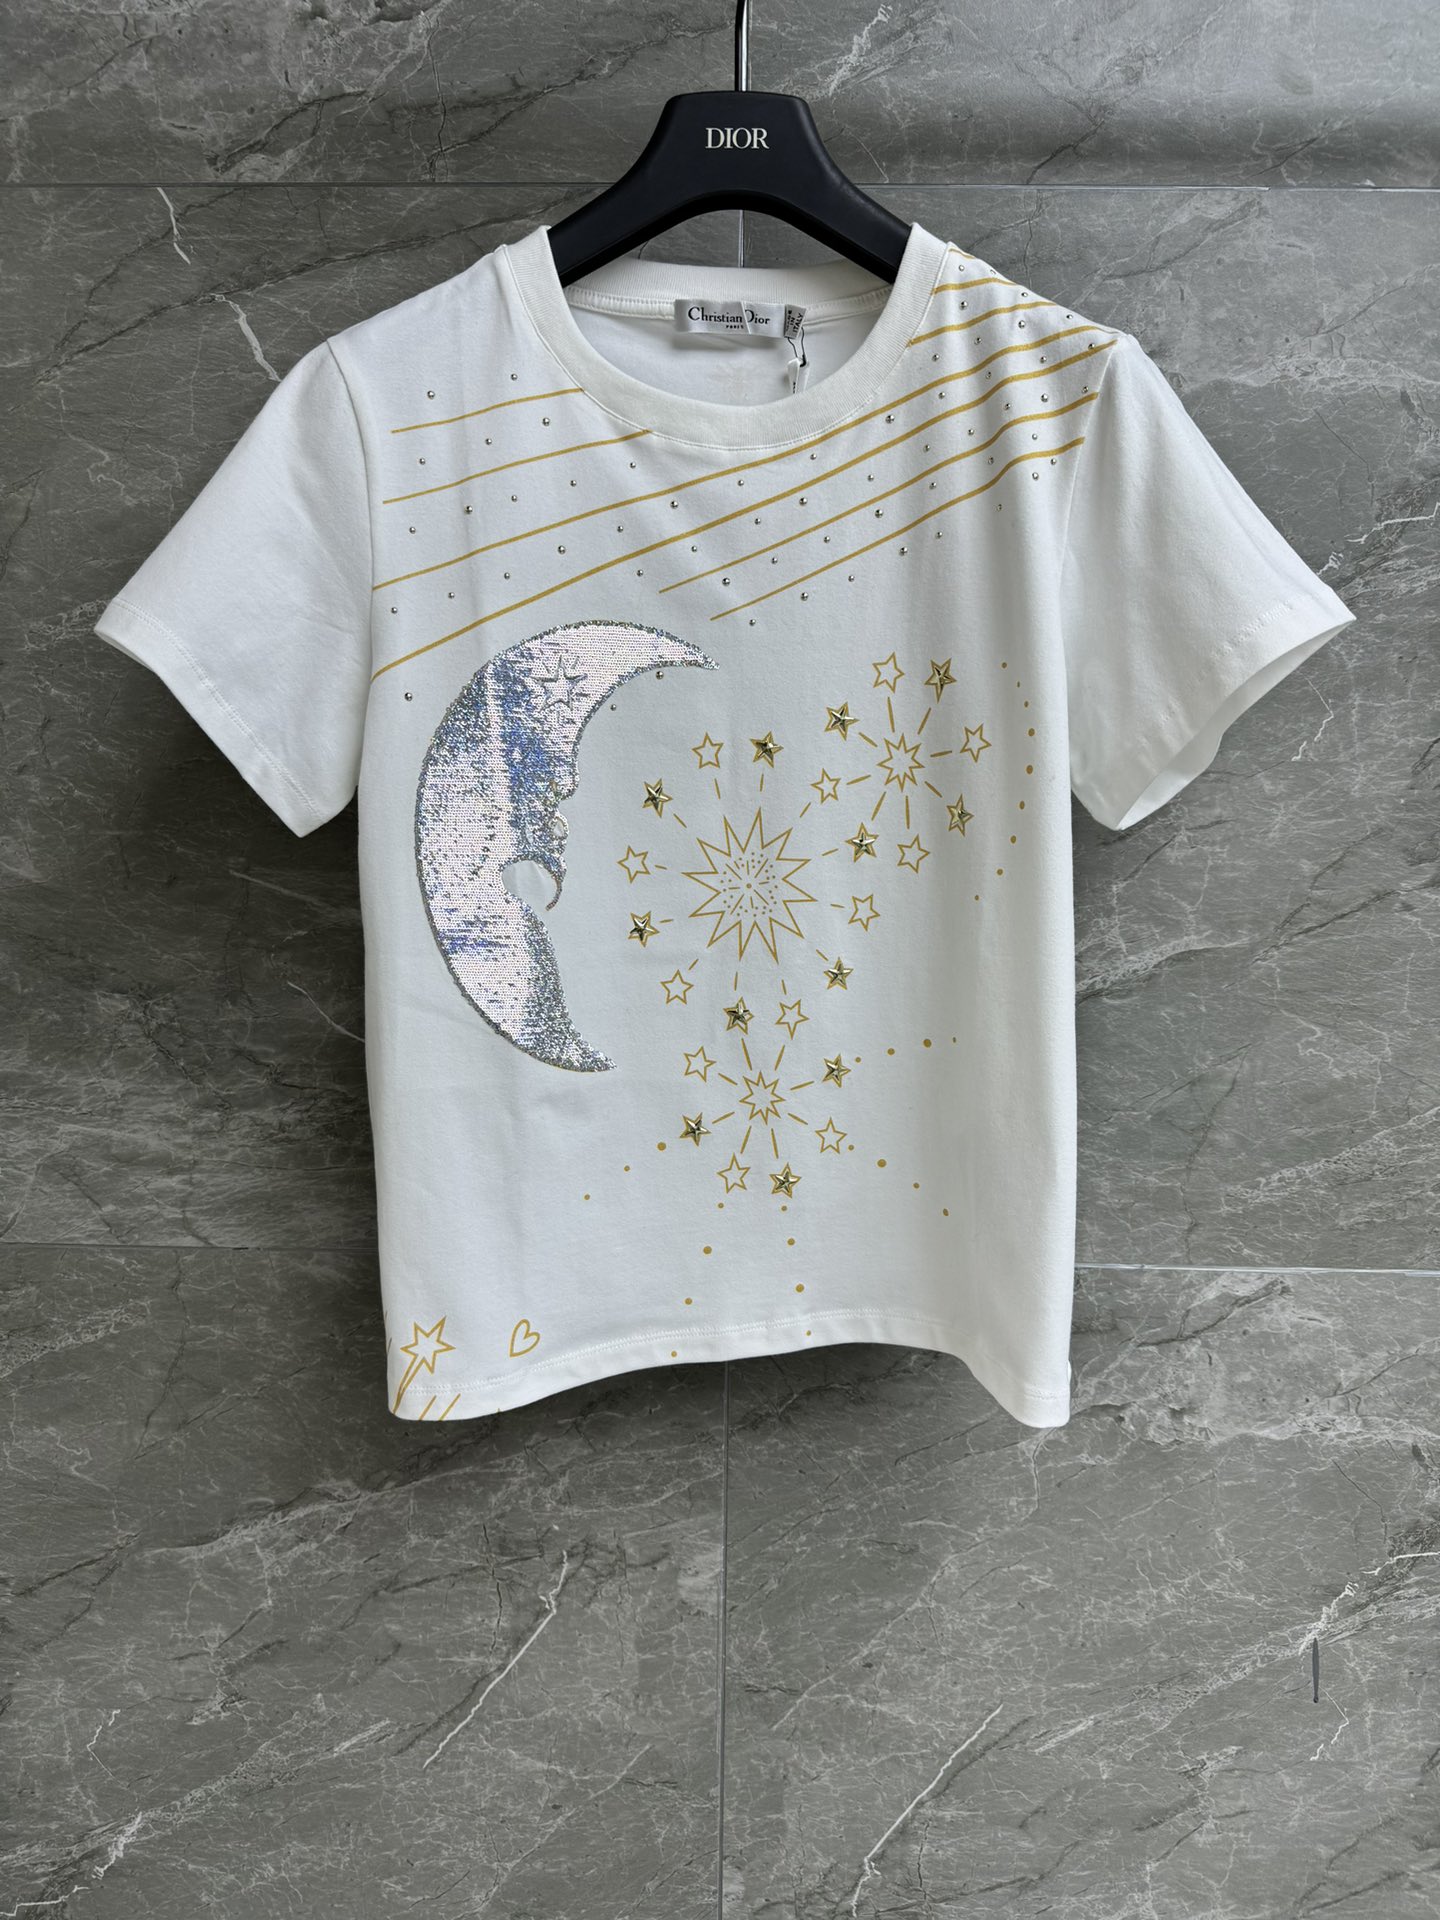 Dior Clothing T-Shirt Embroidery Cotton Spring/Summer Collection SML535170